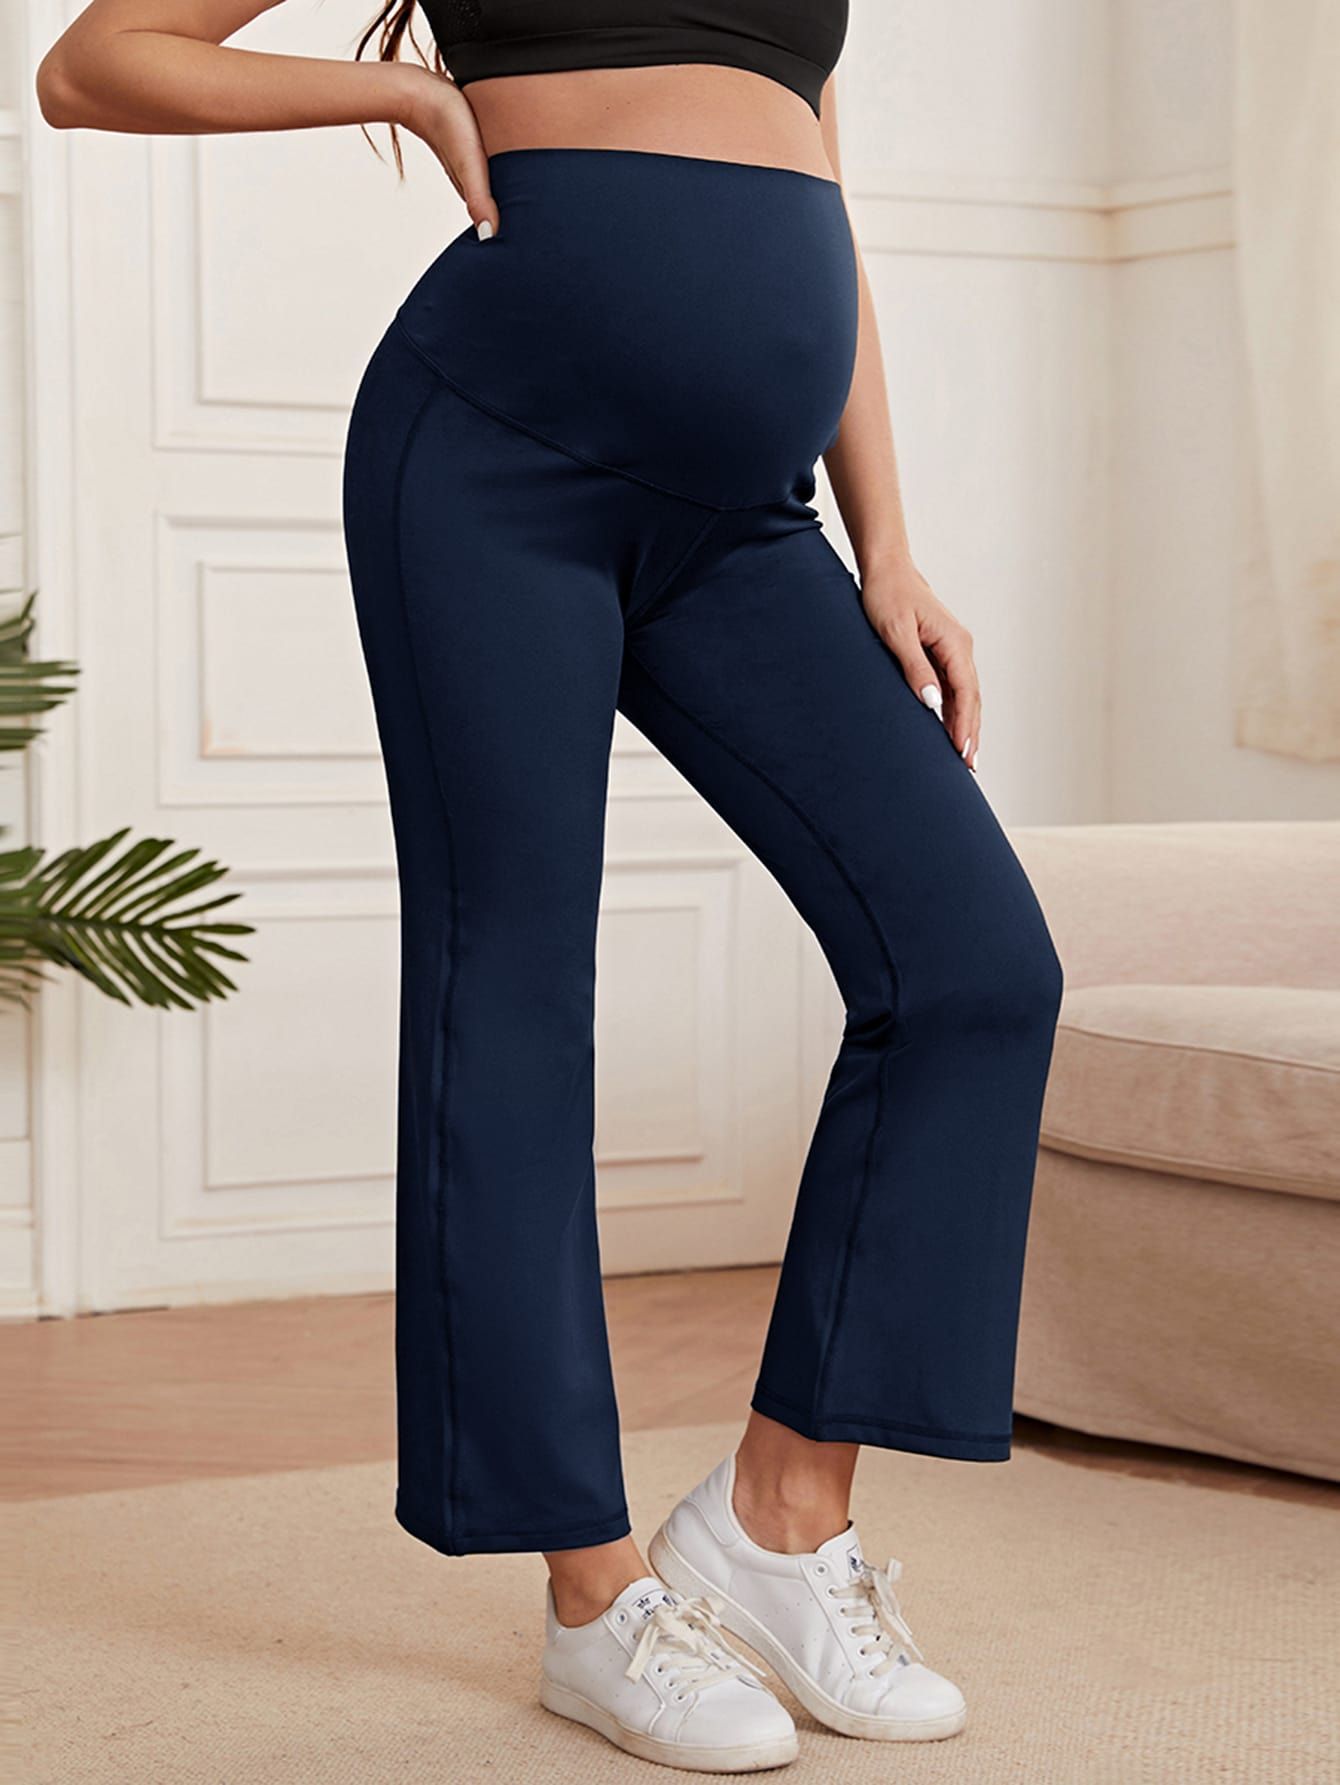 Buy Maternity Clothes Pregnancy Wear Online India MOMZJOYCOM